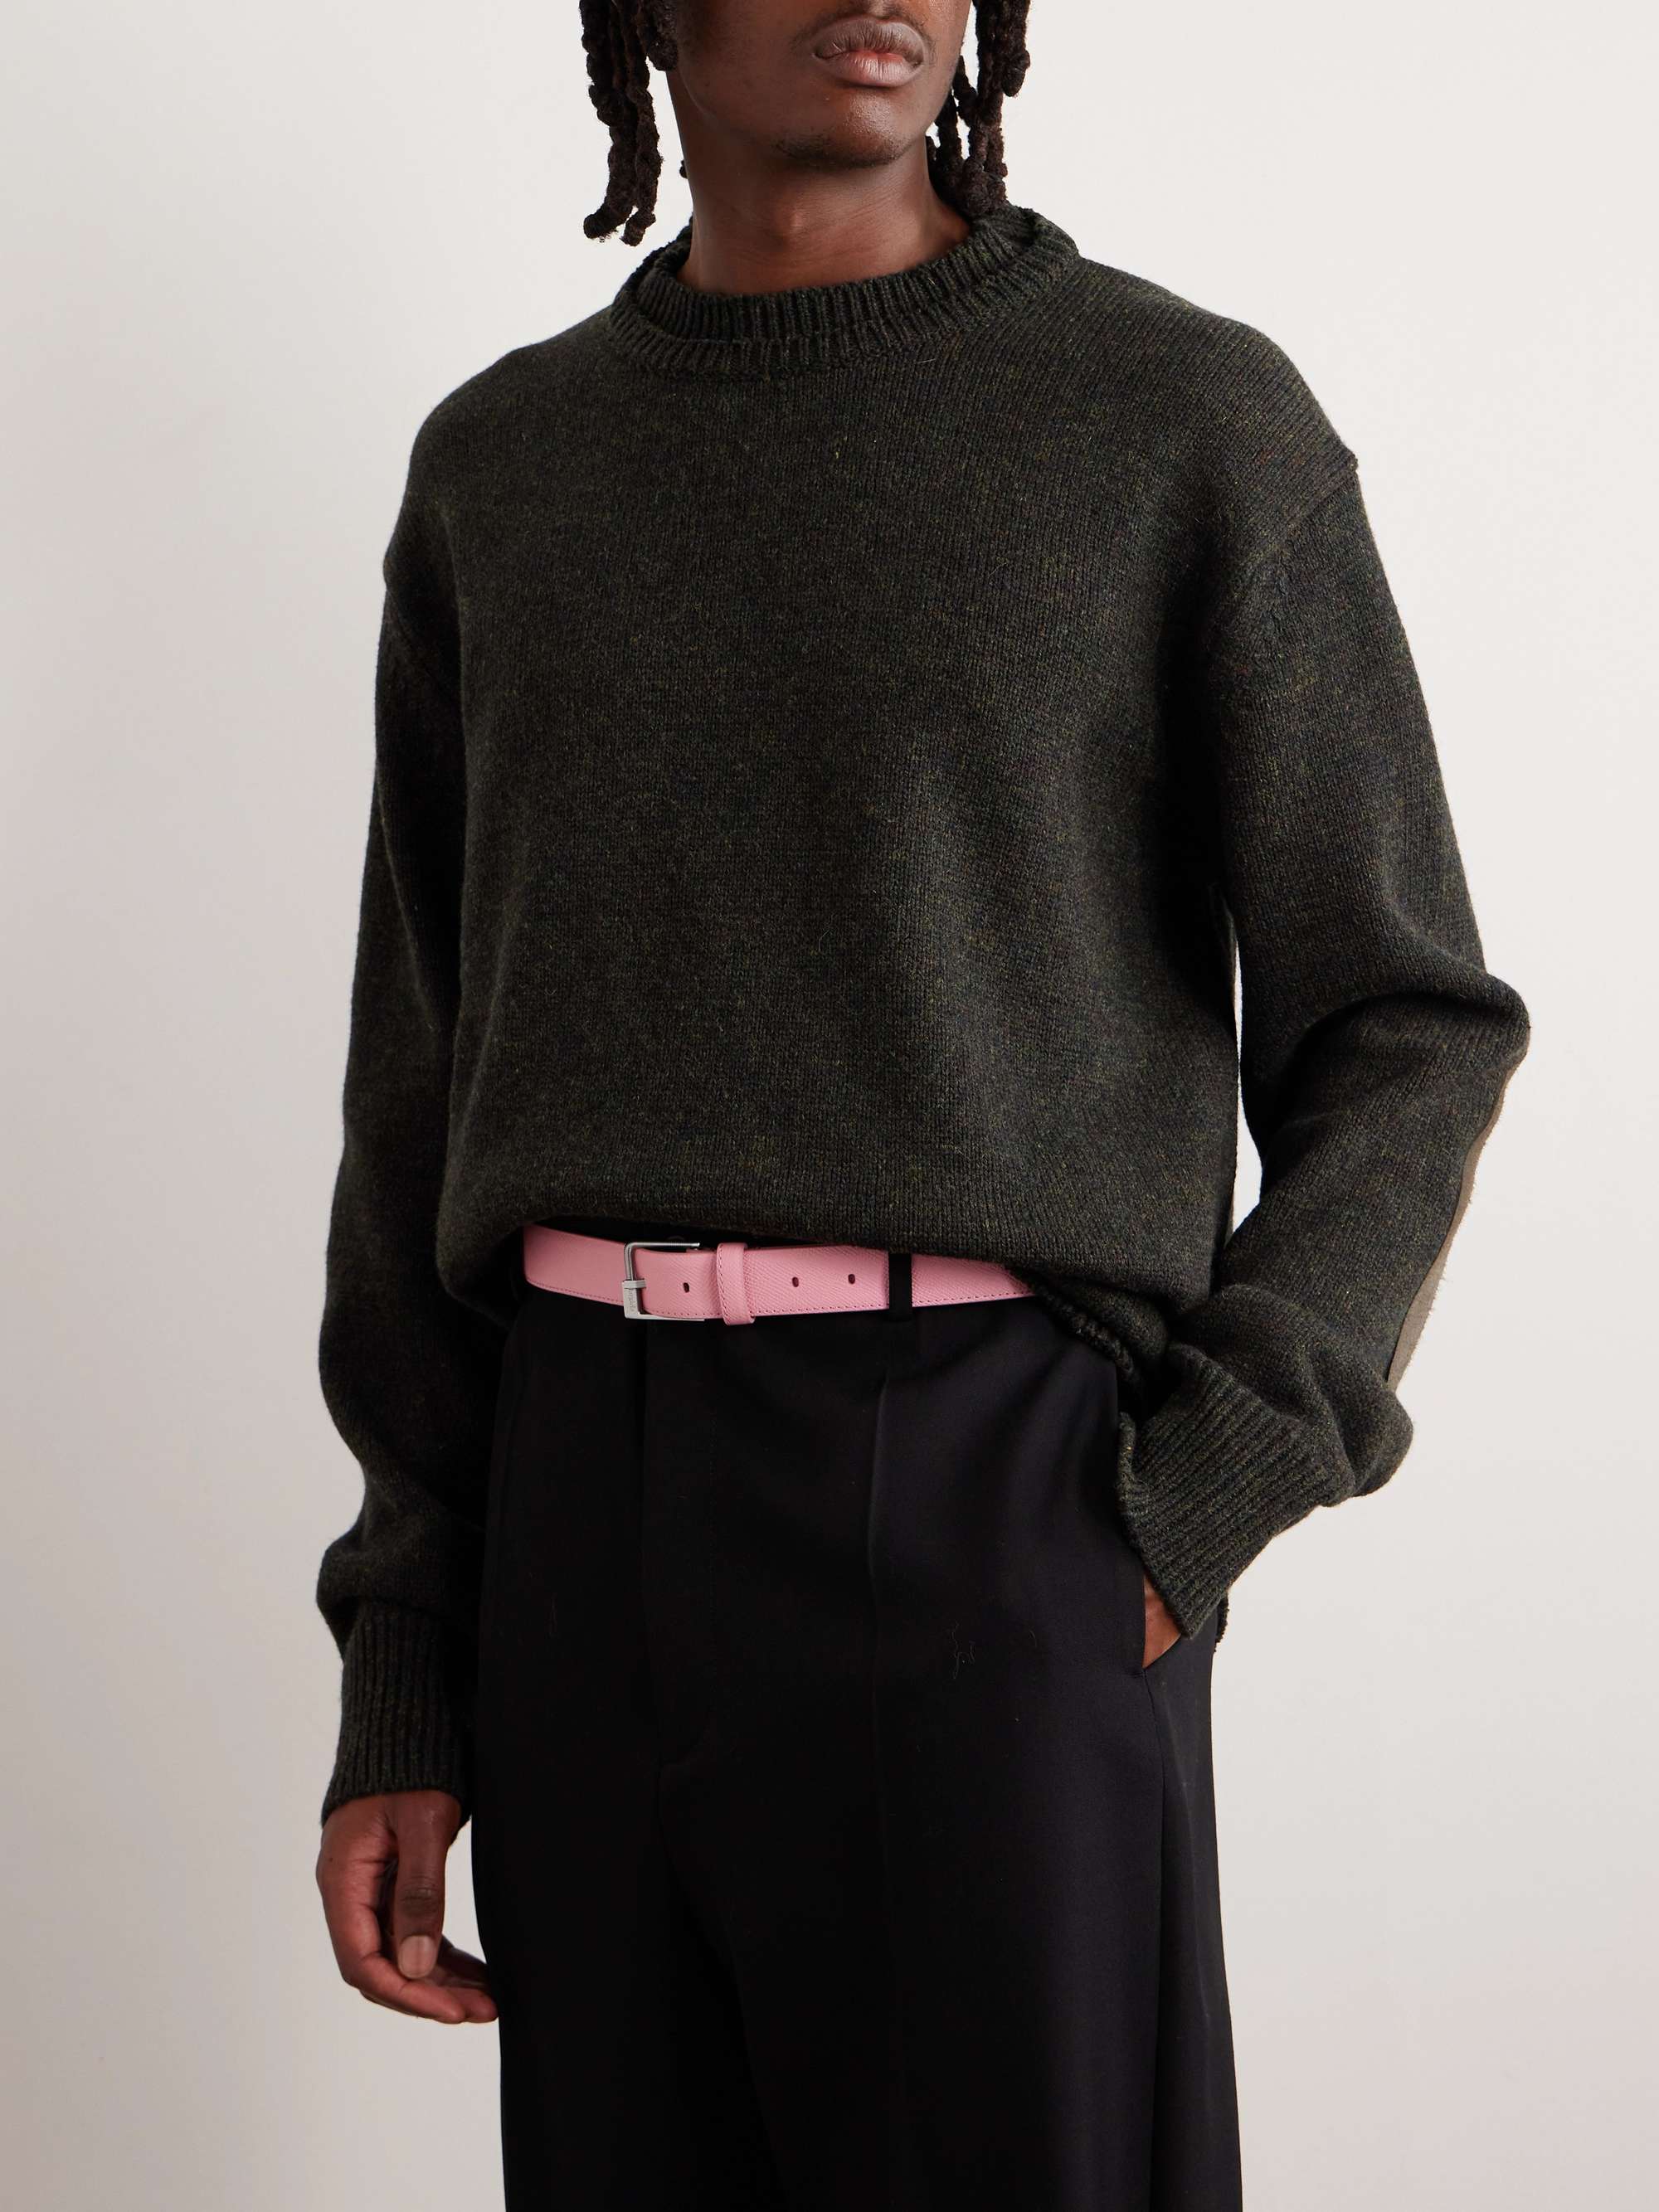 MAISON MARGIELA Suede-Trimmed Wool, Linen and Cotton-Blend Sweater